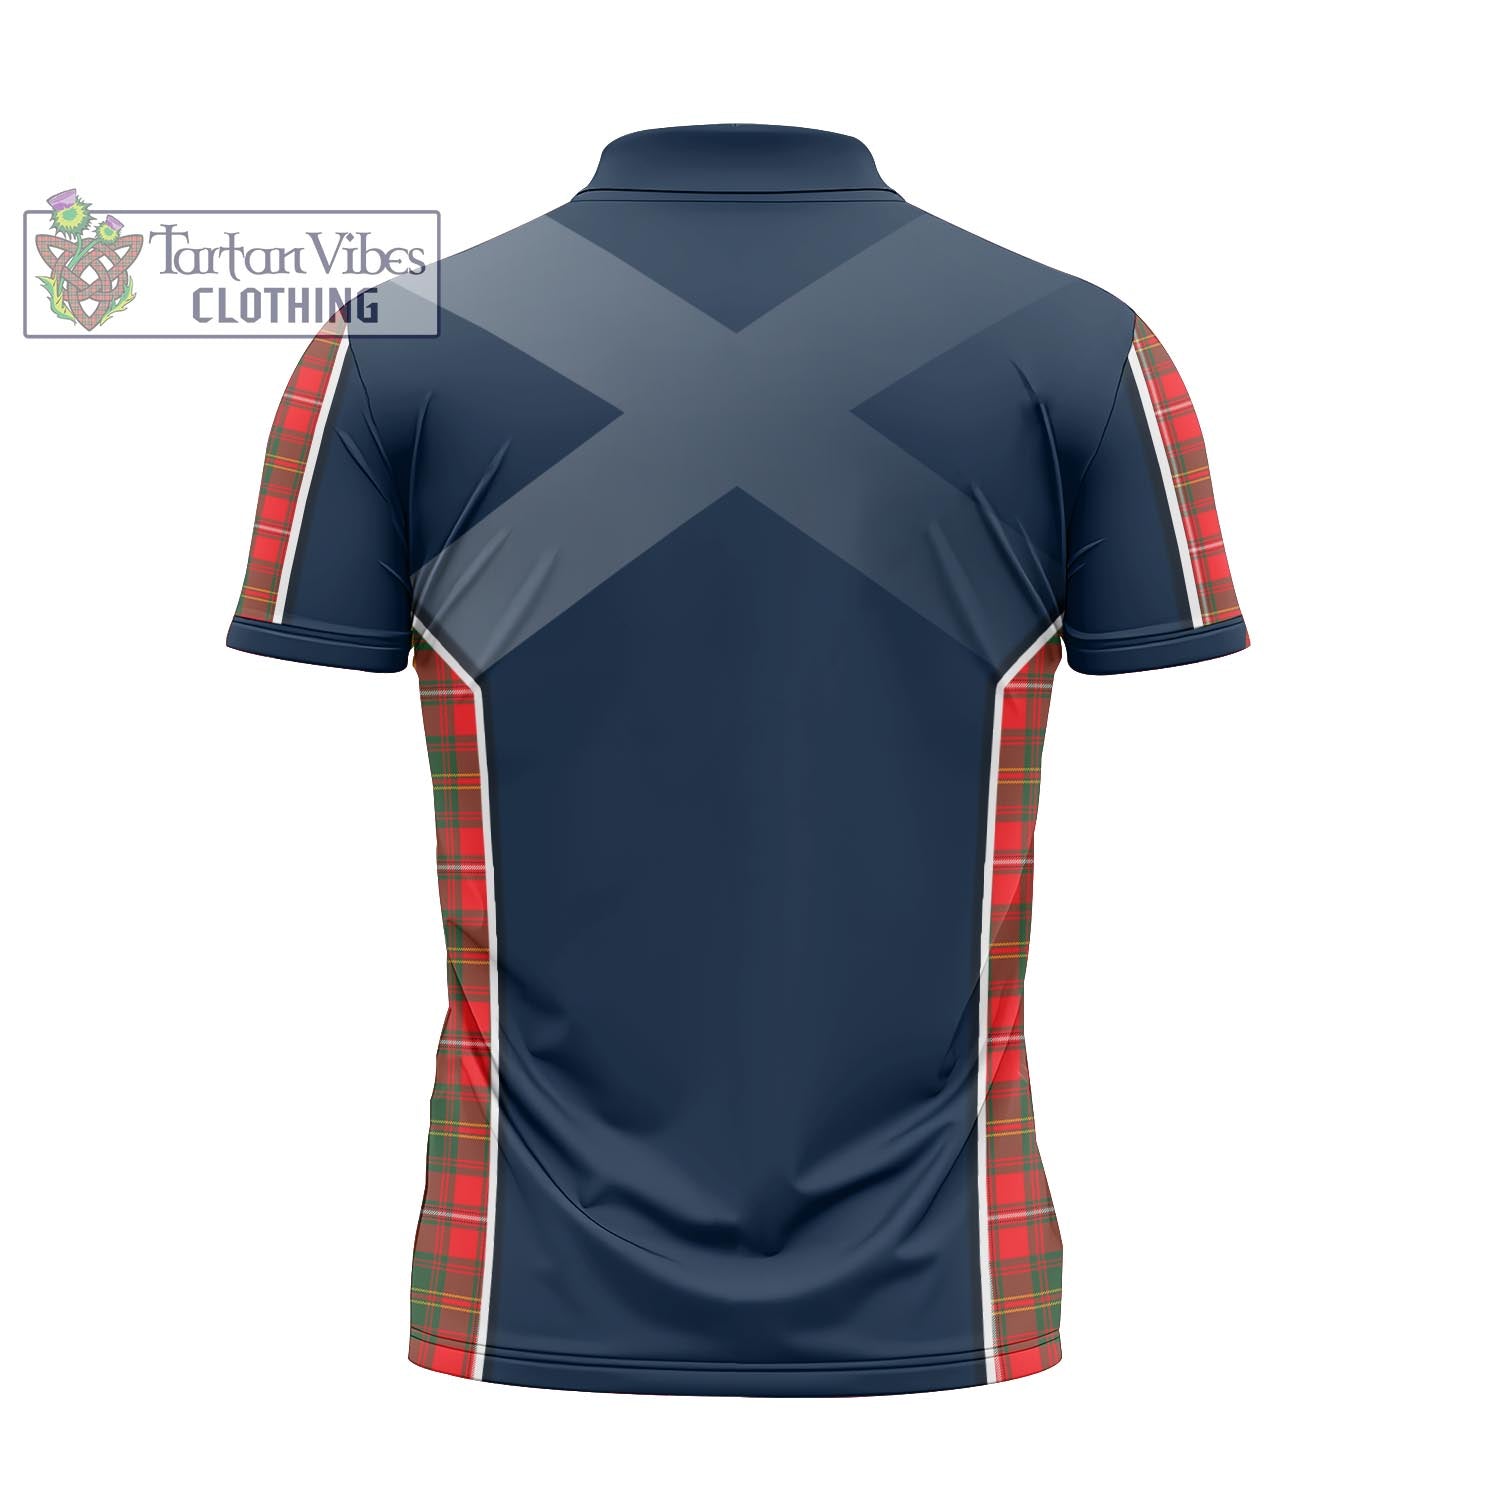 Tartan Vibes Clothing Hay Modern Tartan Zipper Polo Shirt with Family Crest and Lion Rampant Vibes Sport Style